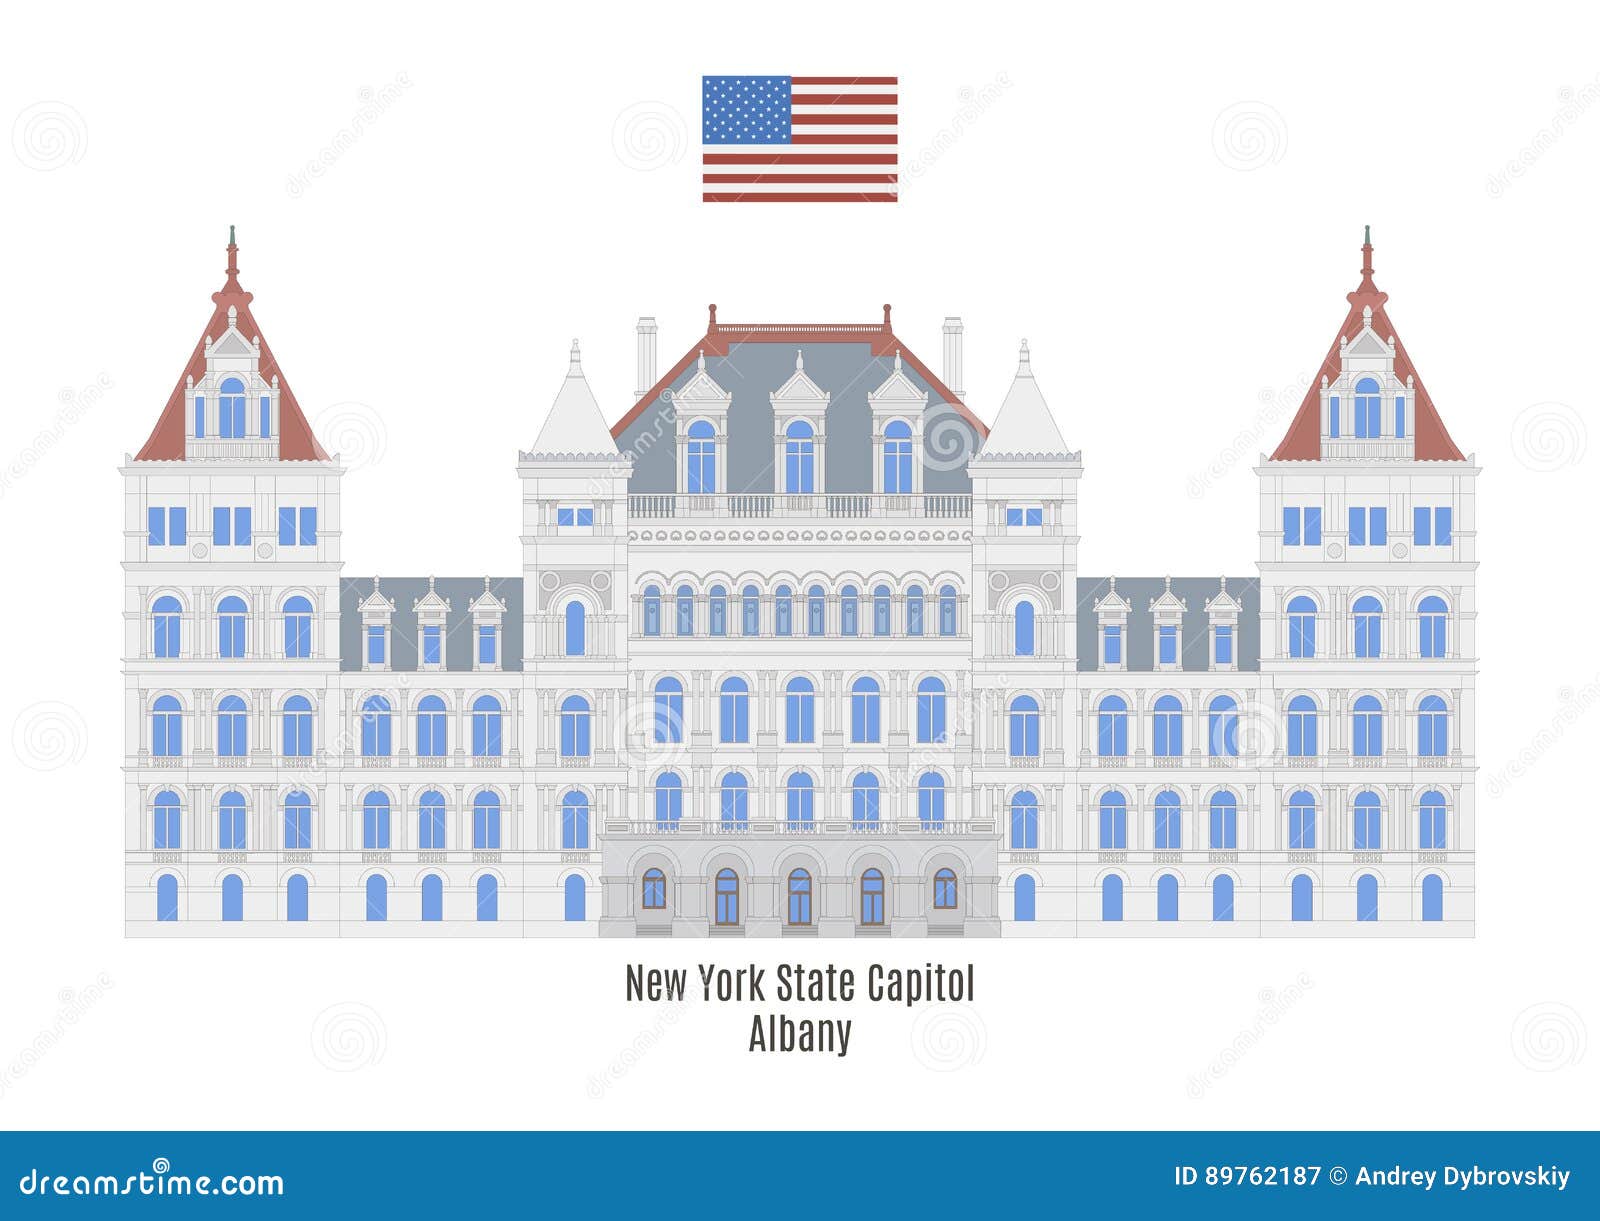 new york state capitol, albany